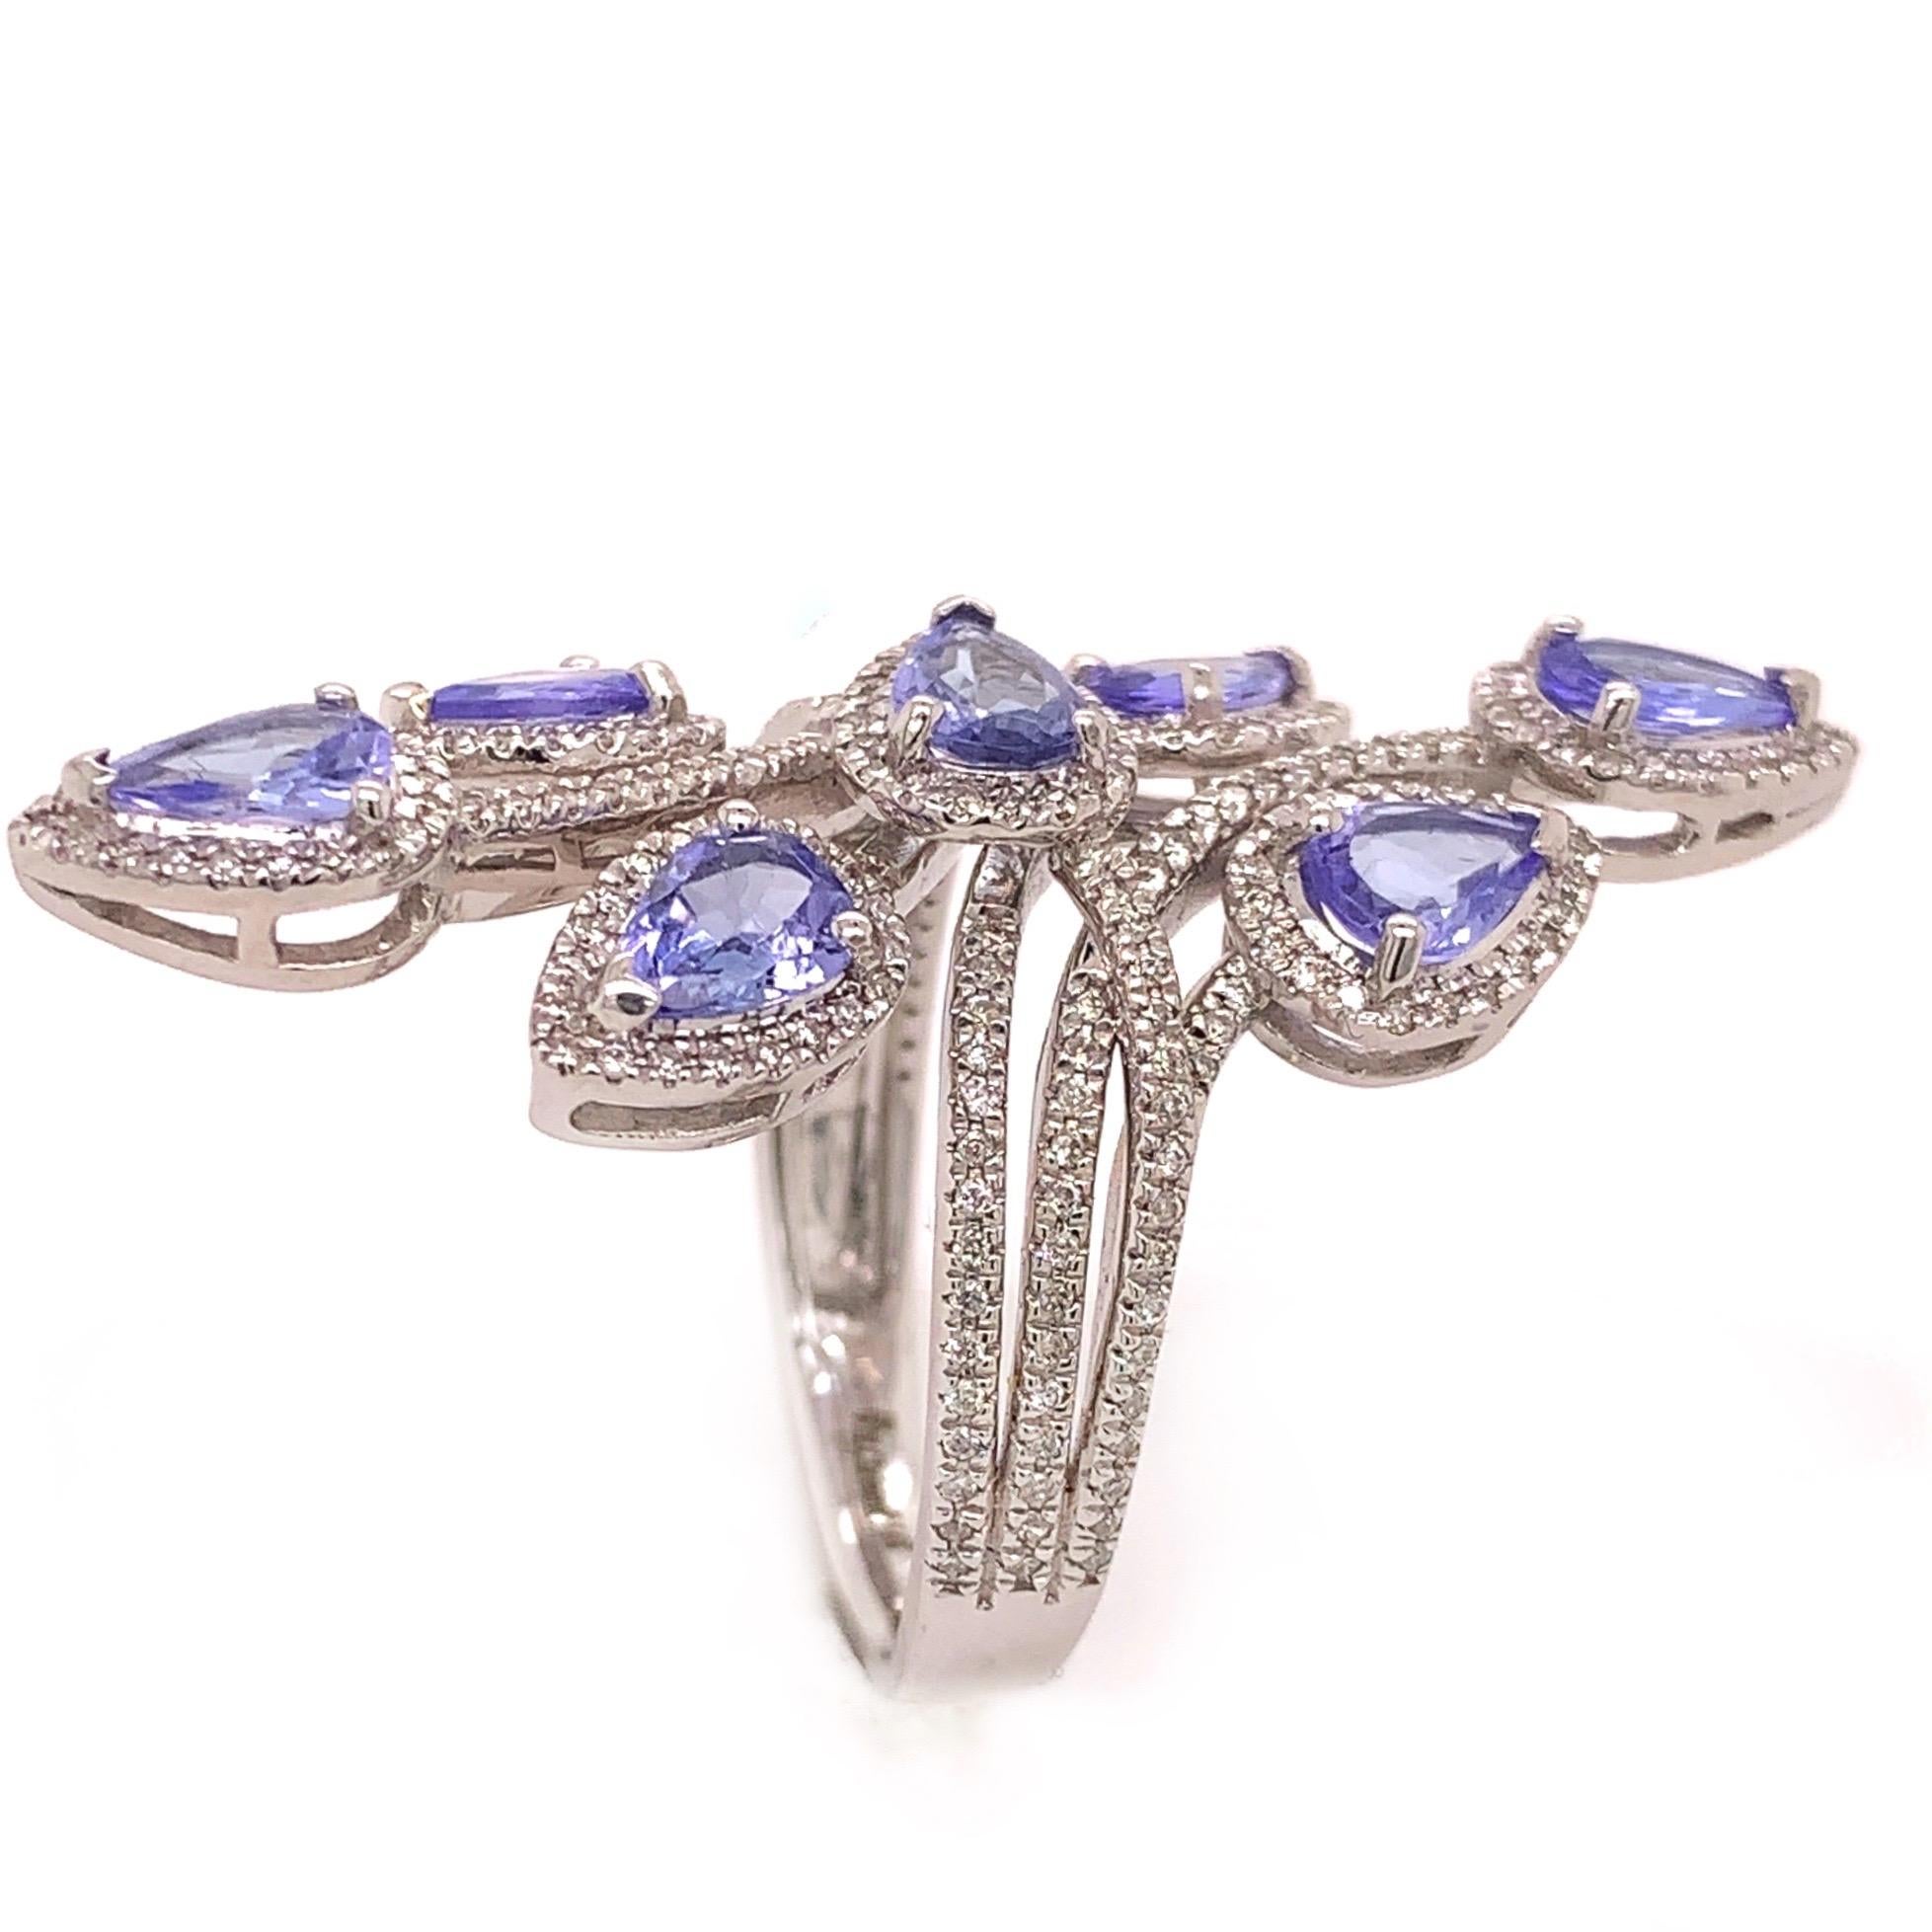 Glamorous tanzanite diamond cocktail ring. High brilliance, lively violet-purple, pear shape faceted natural 1.91 carats tanzanite mounted in open profile with bead prongs accented in round brilliant cut diamonds. Handcrafted cocktail ring set in